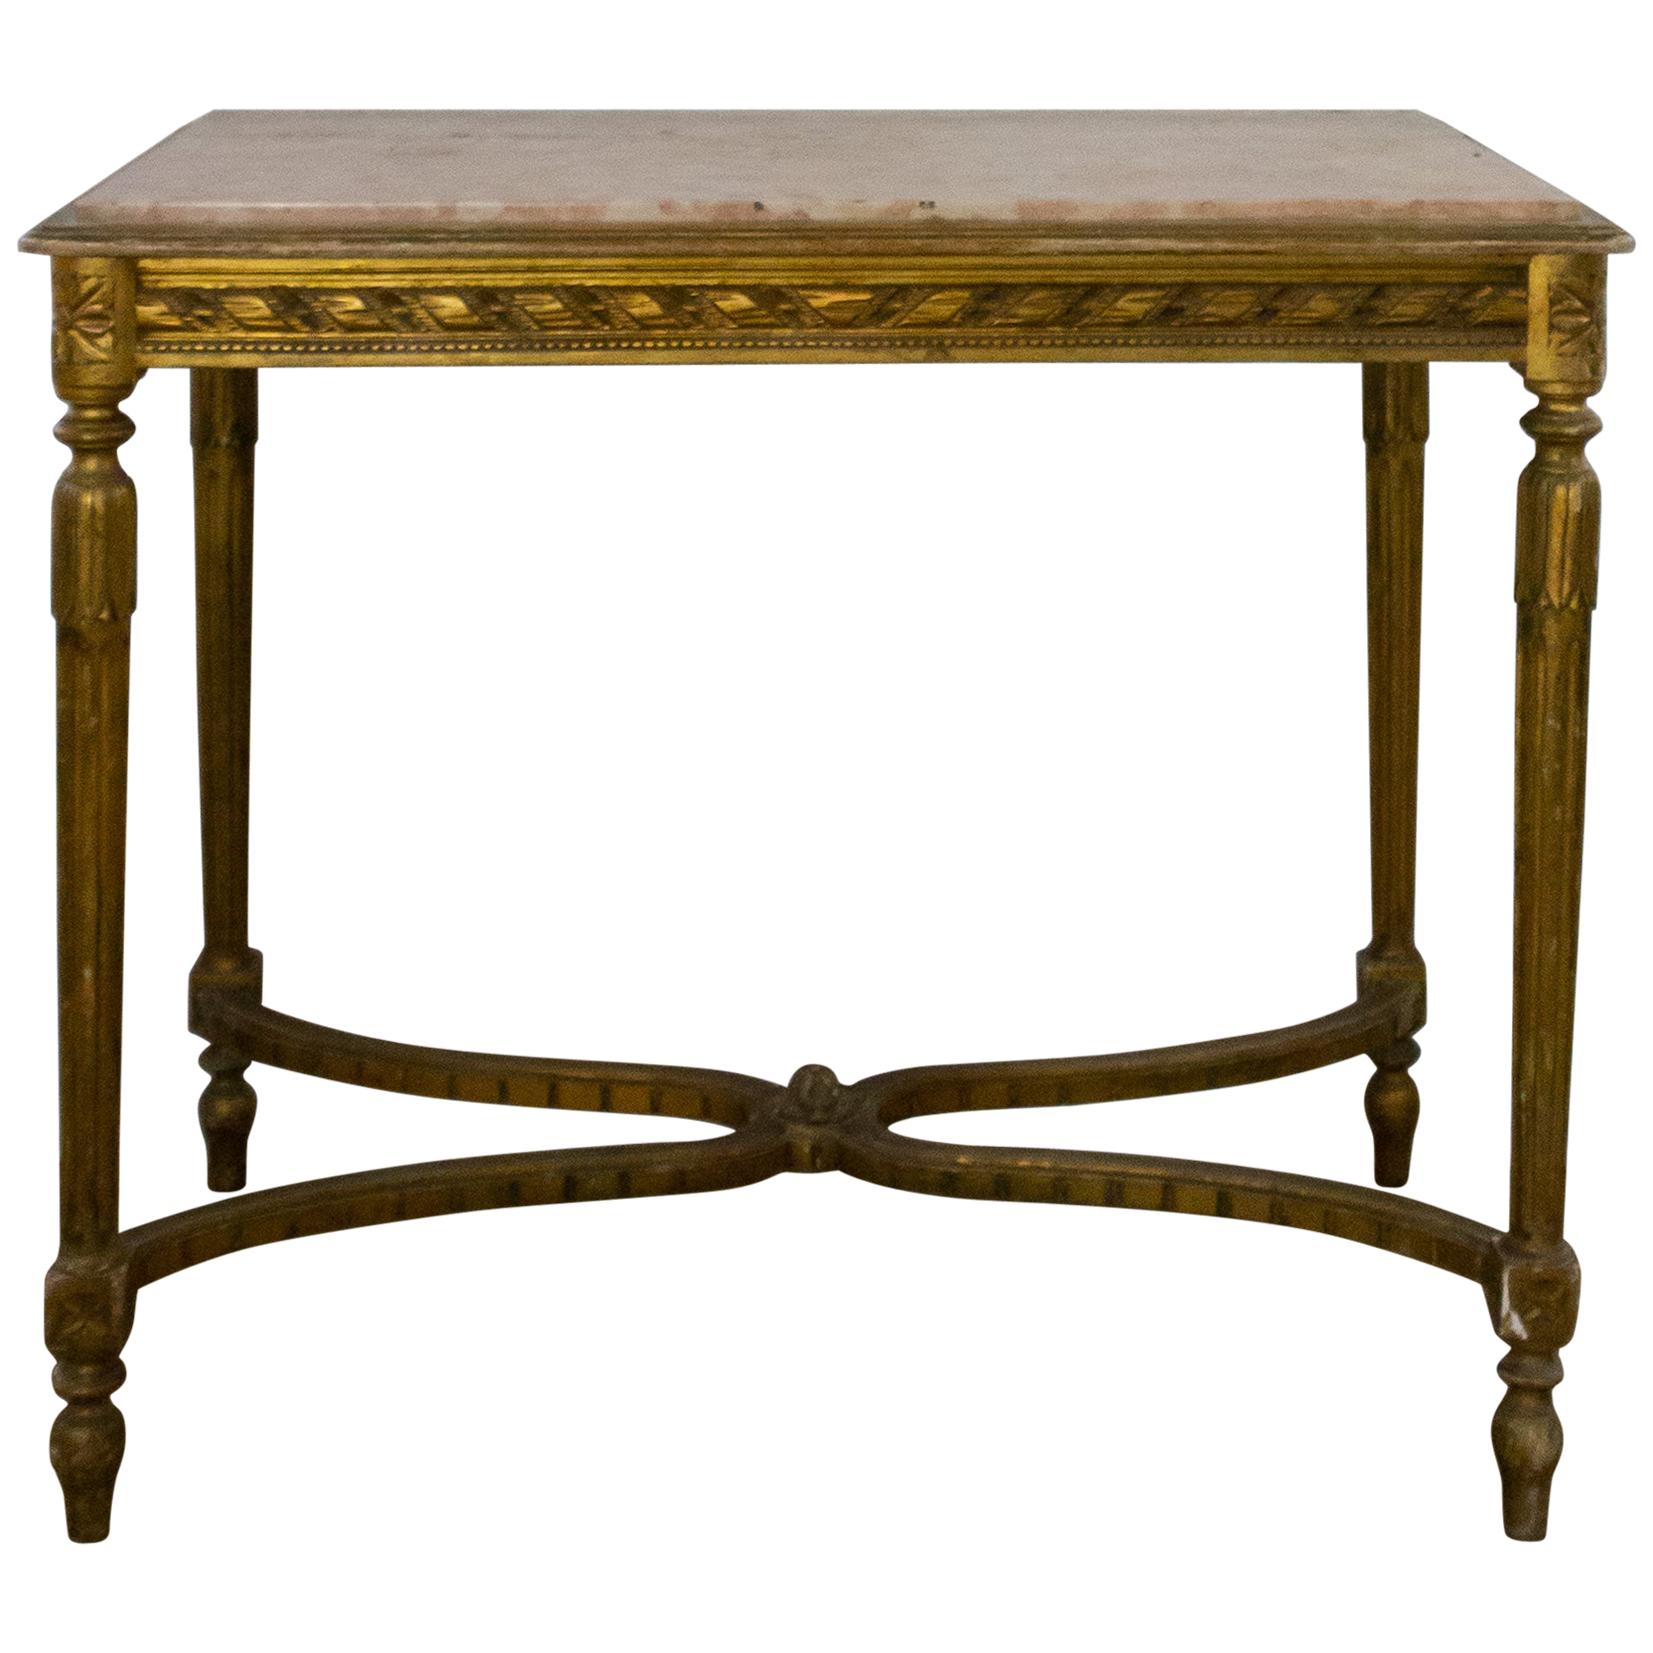 French Louis XVI Center Table in Gilded Wood and Marble - 19th France